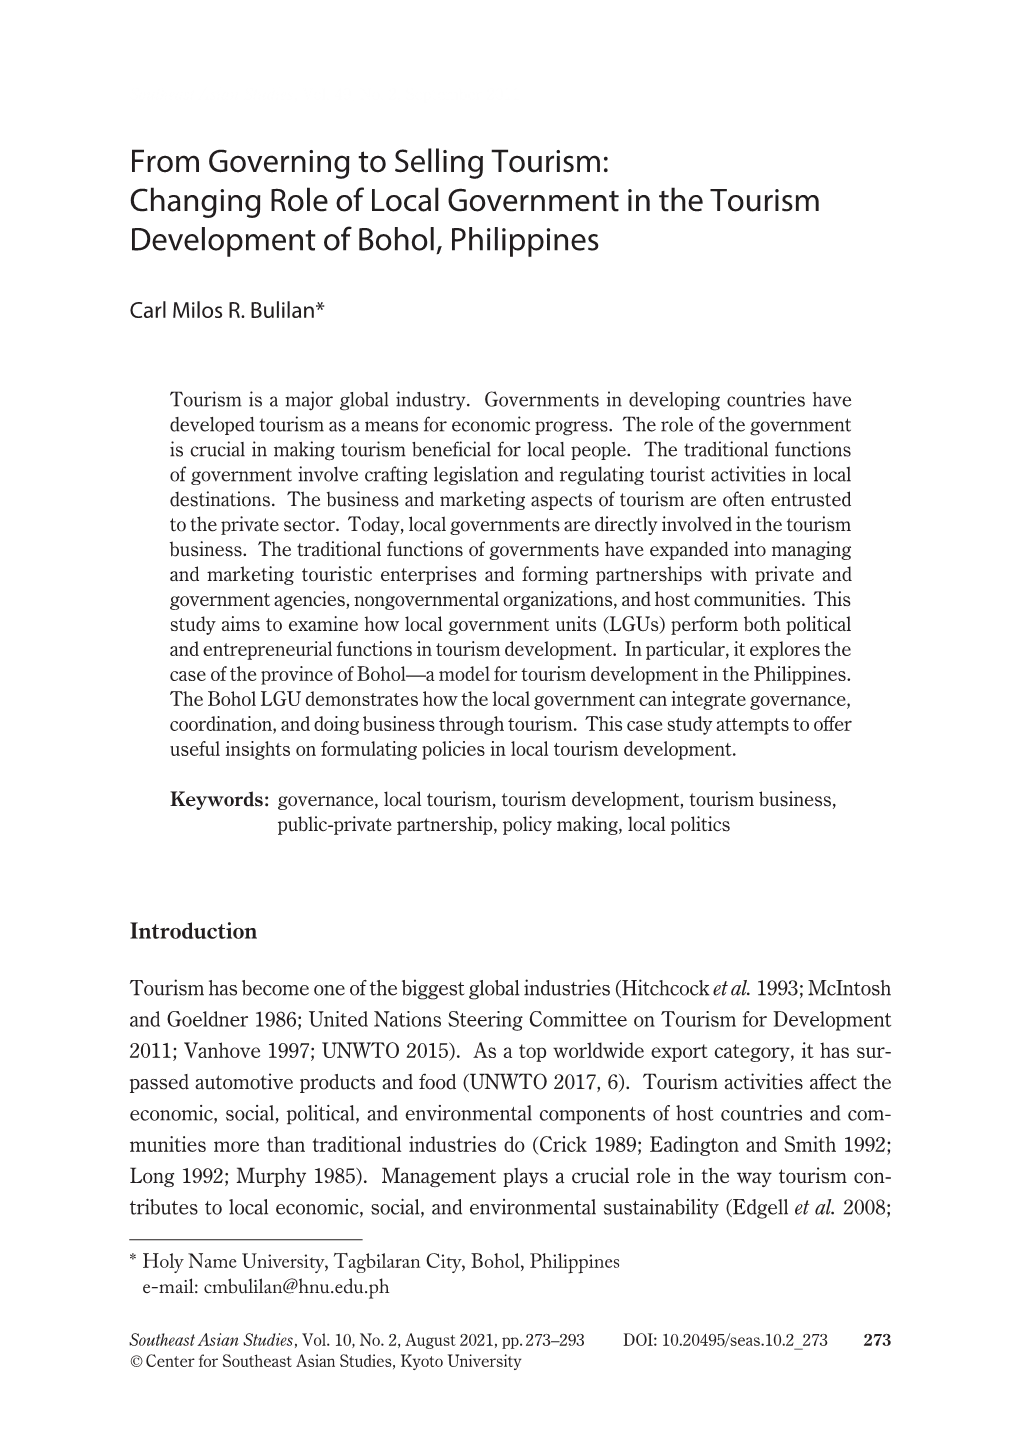 From Governing to Selling Tourism: Changing Role of Local Government in the Tourism Development of Bohol, Philippines